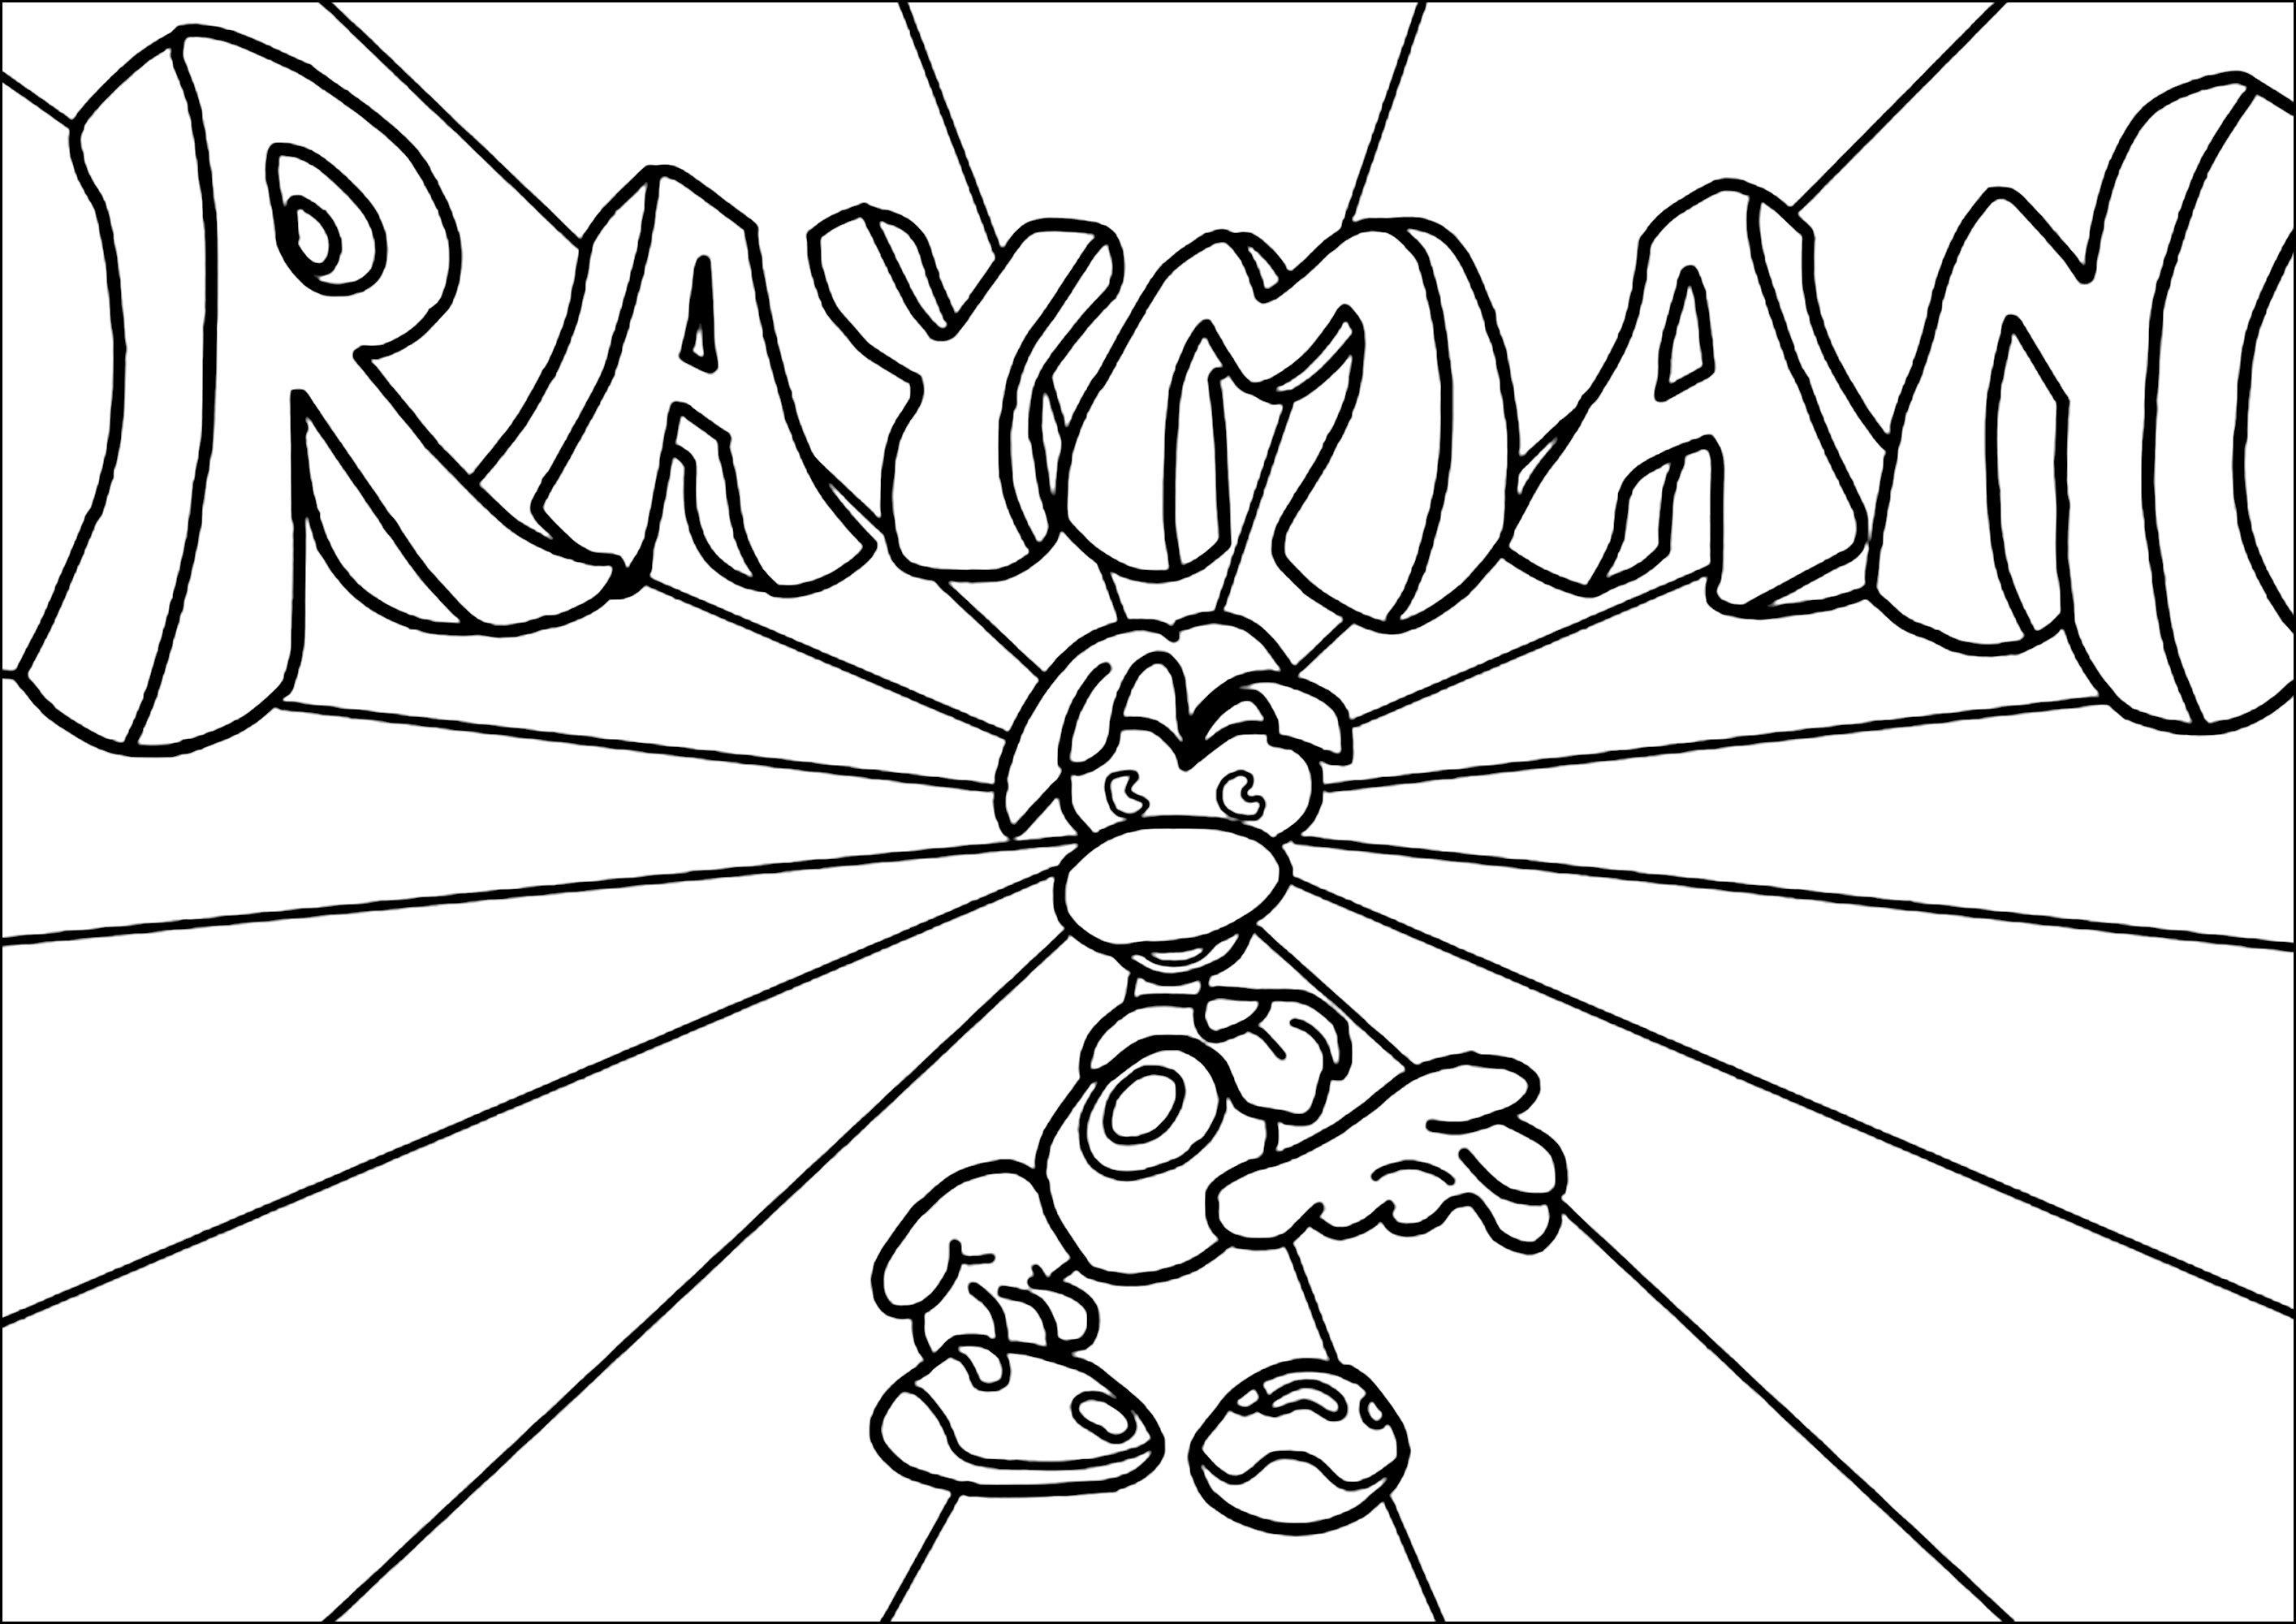 Rayman character with logo in background